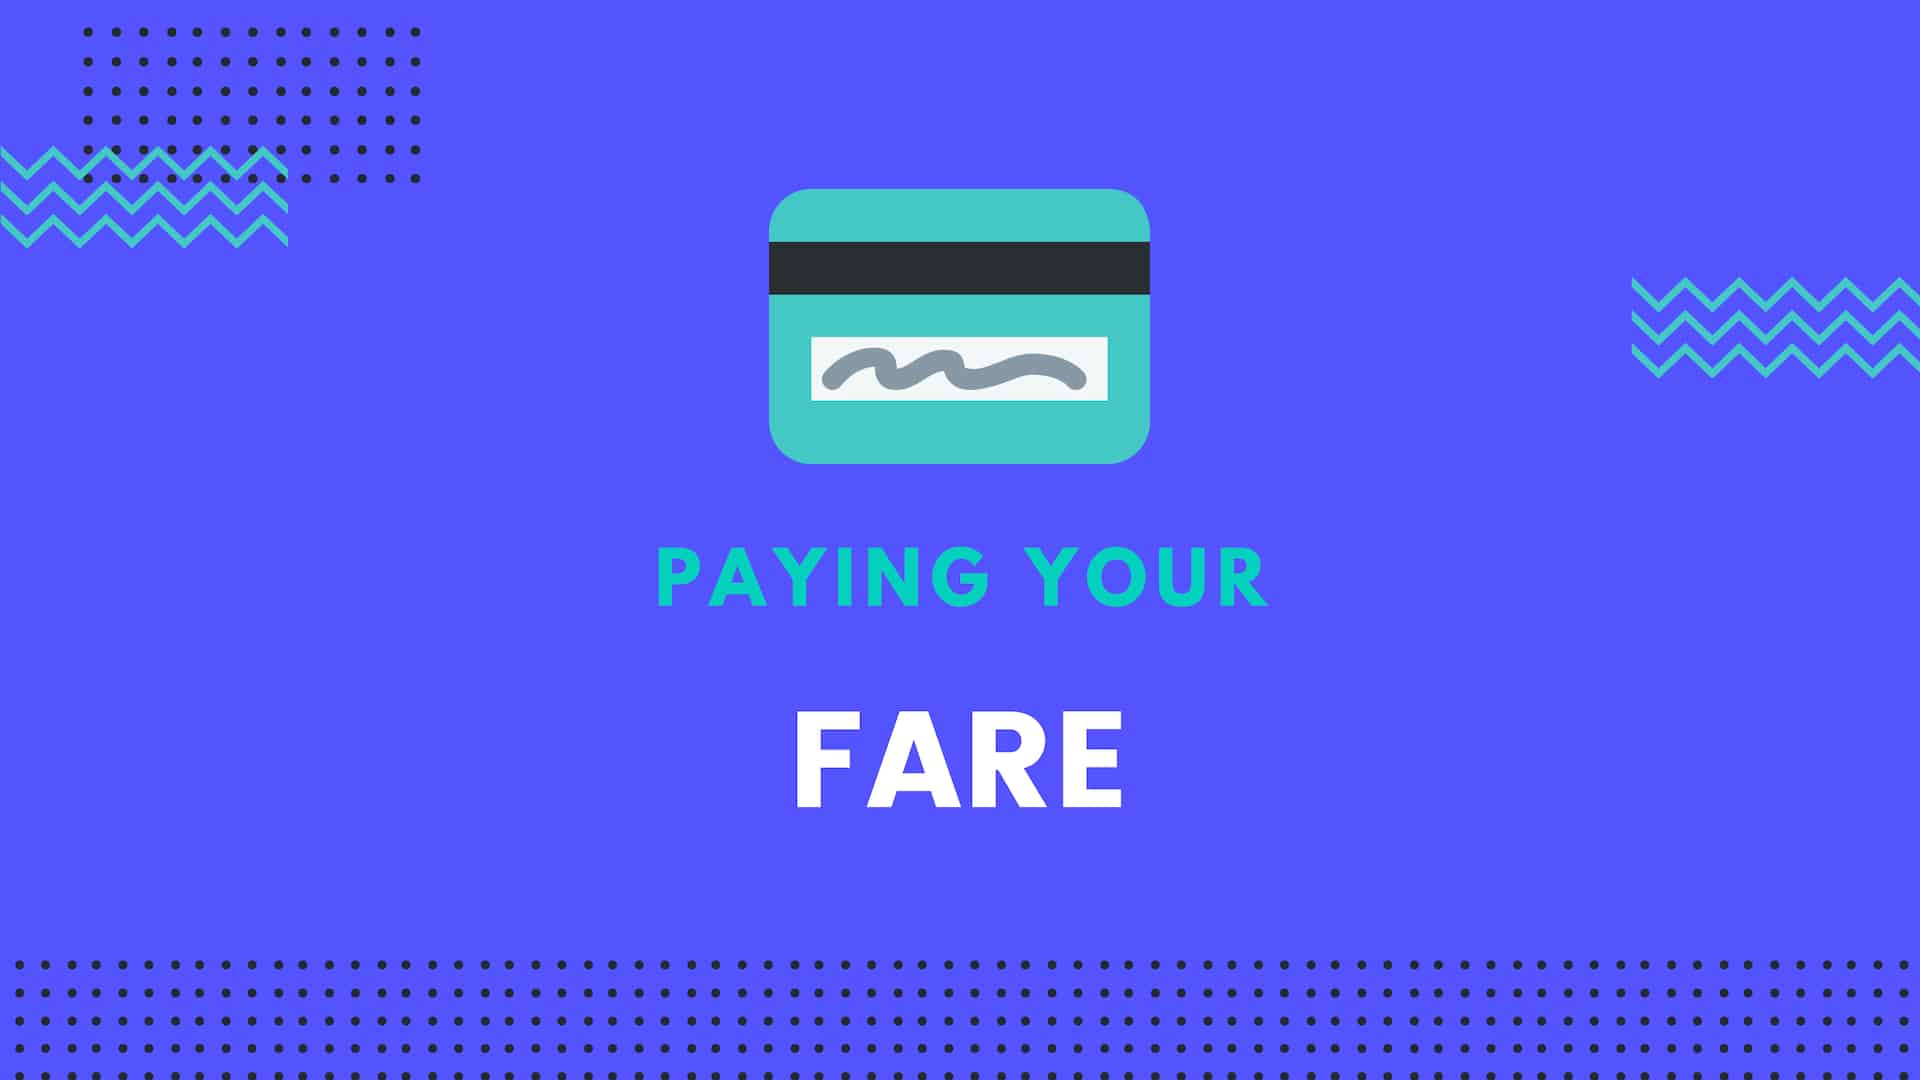 Paying your fare